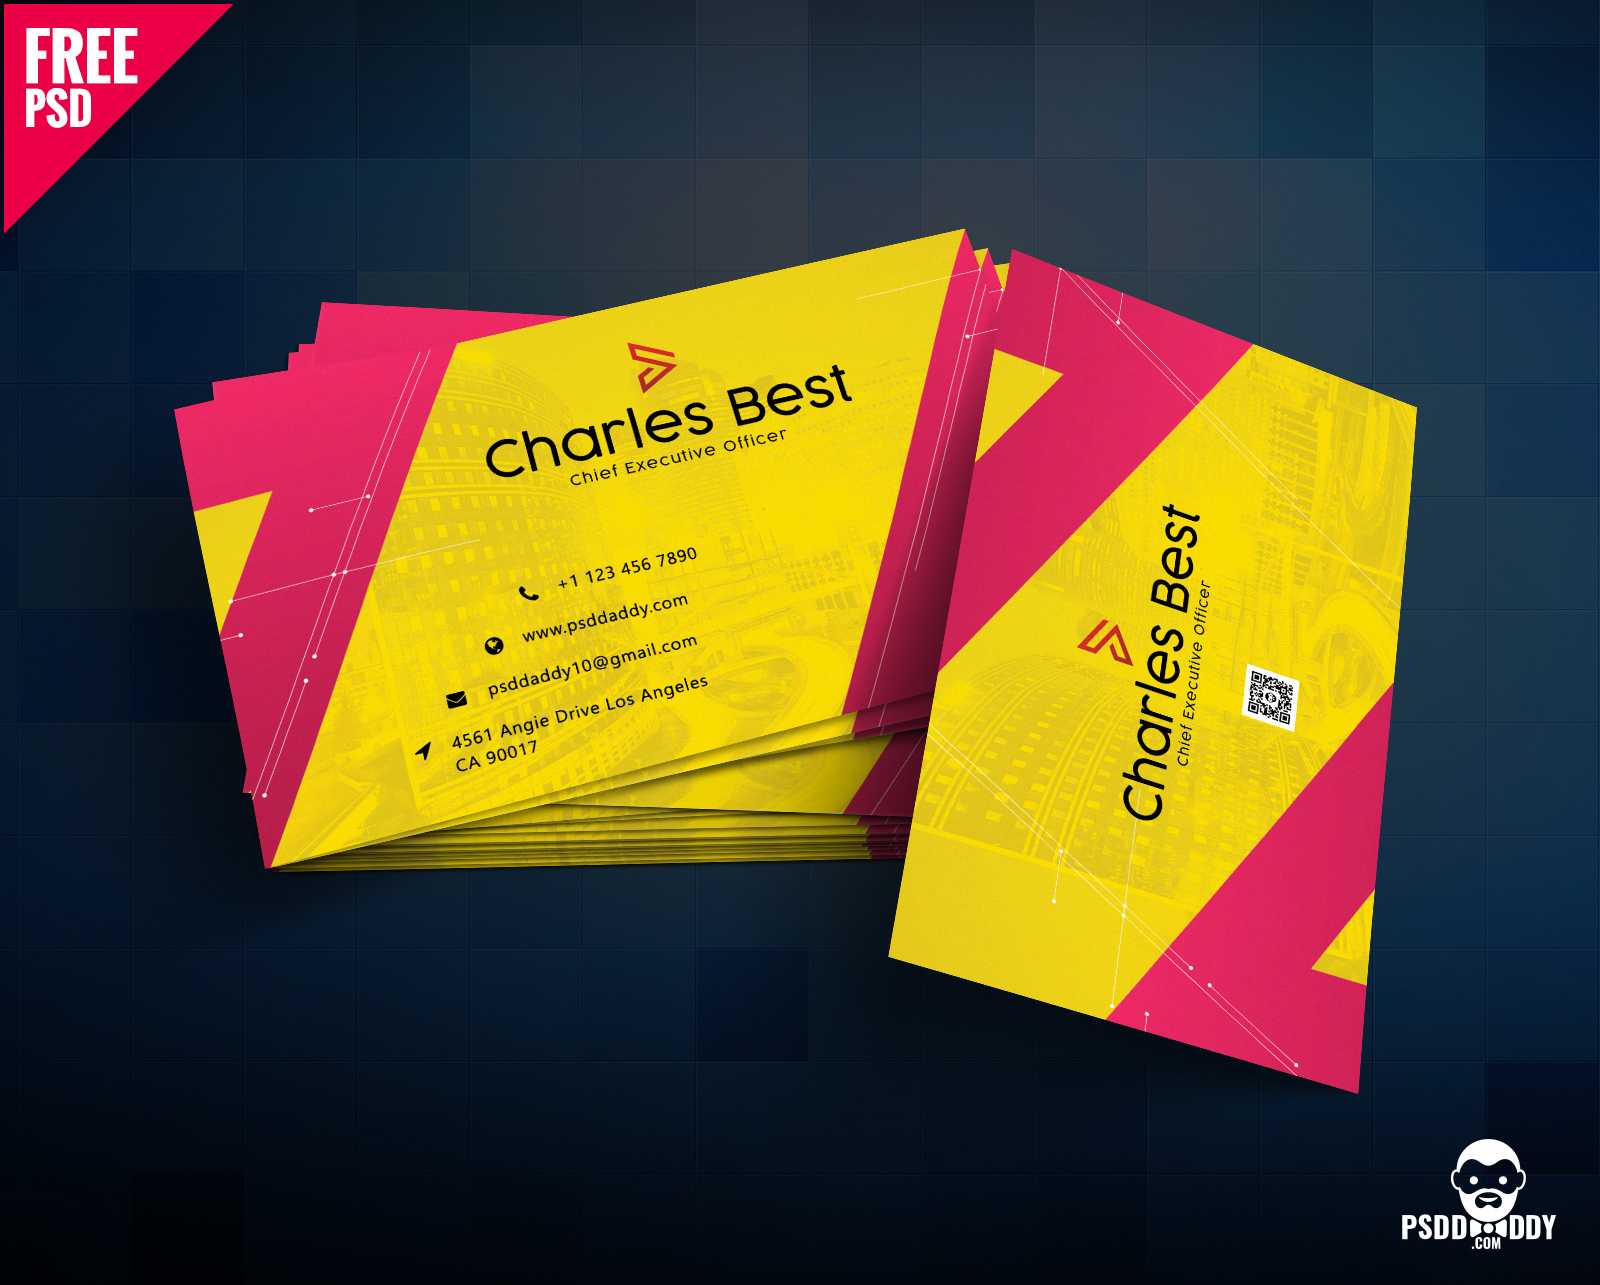 Download] Creative Business Card Free Psd | Psddaddy Within Visiting Card Templates Download